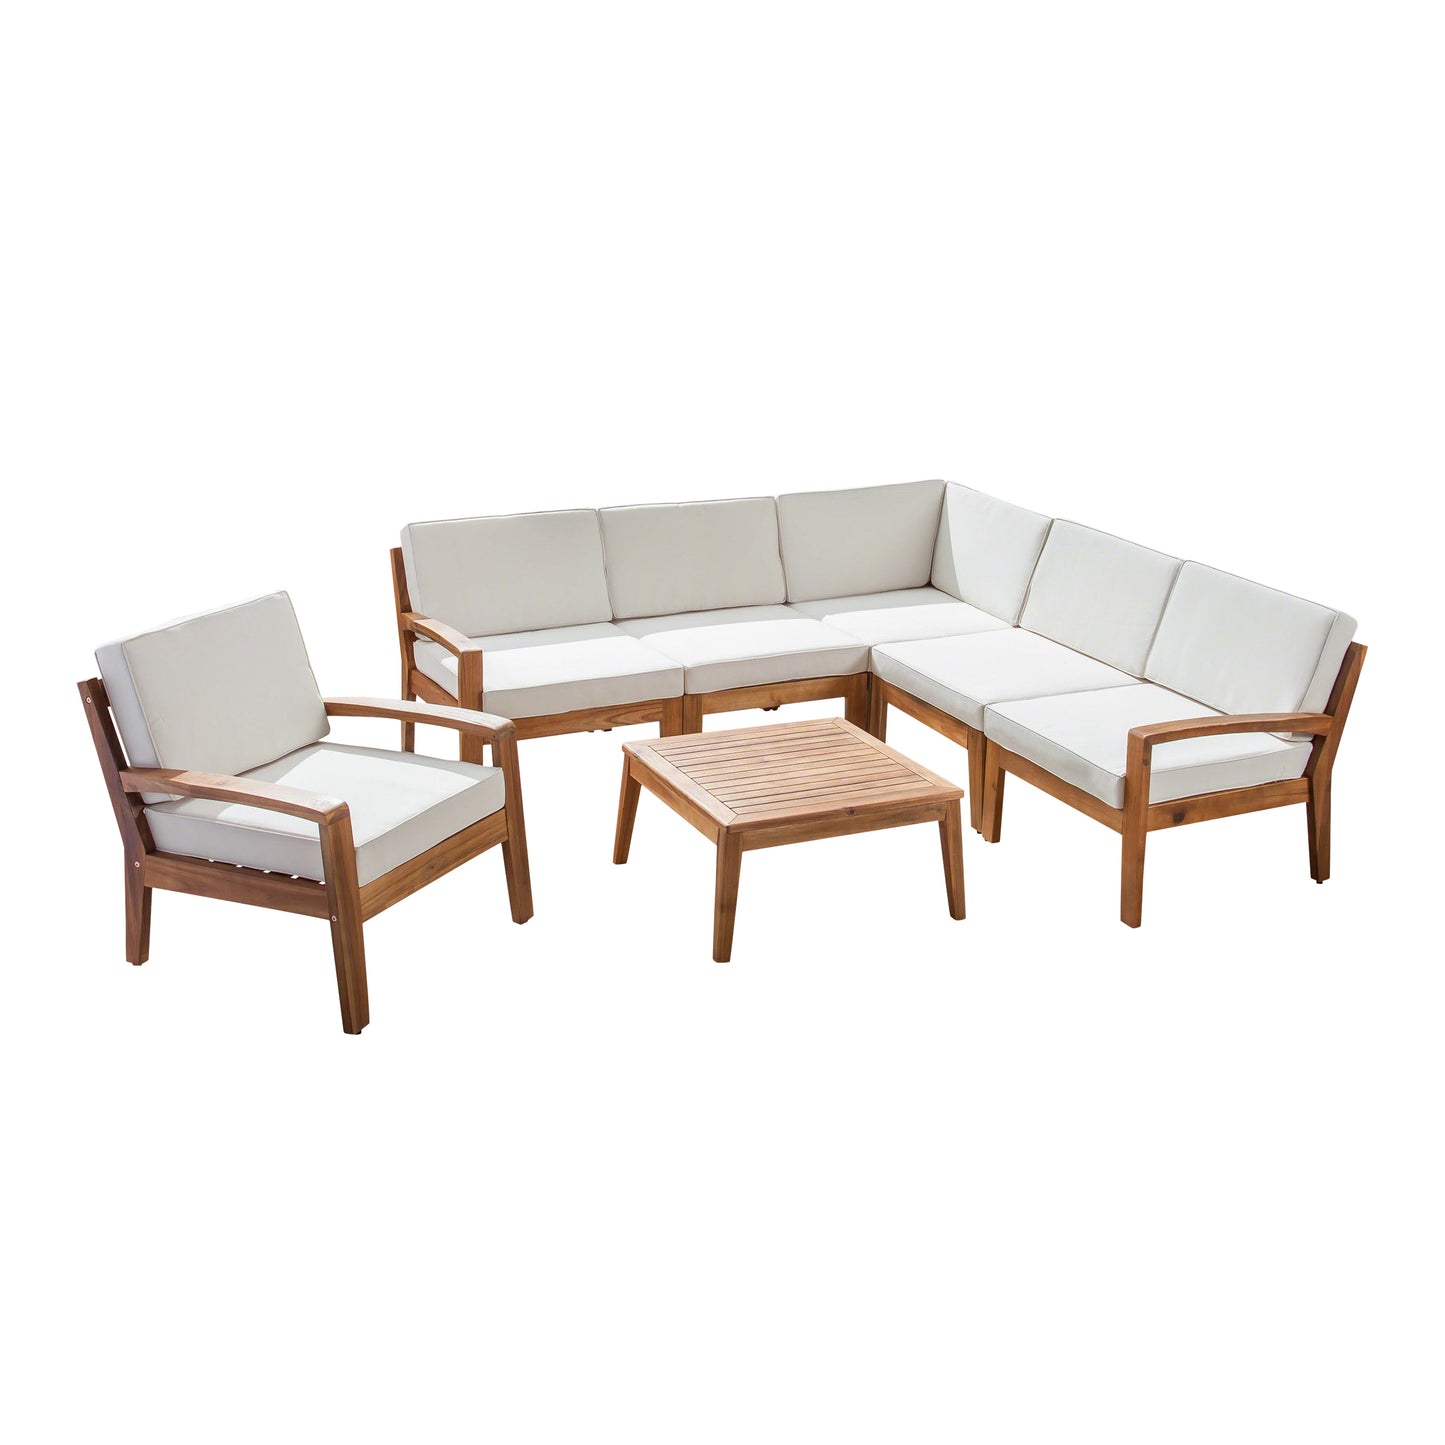 Giselle Outdoor Acacia Wood 6 Seater Sectional Sofa and Club Chair Set with Coffee Table